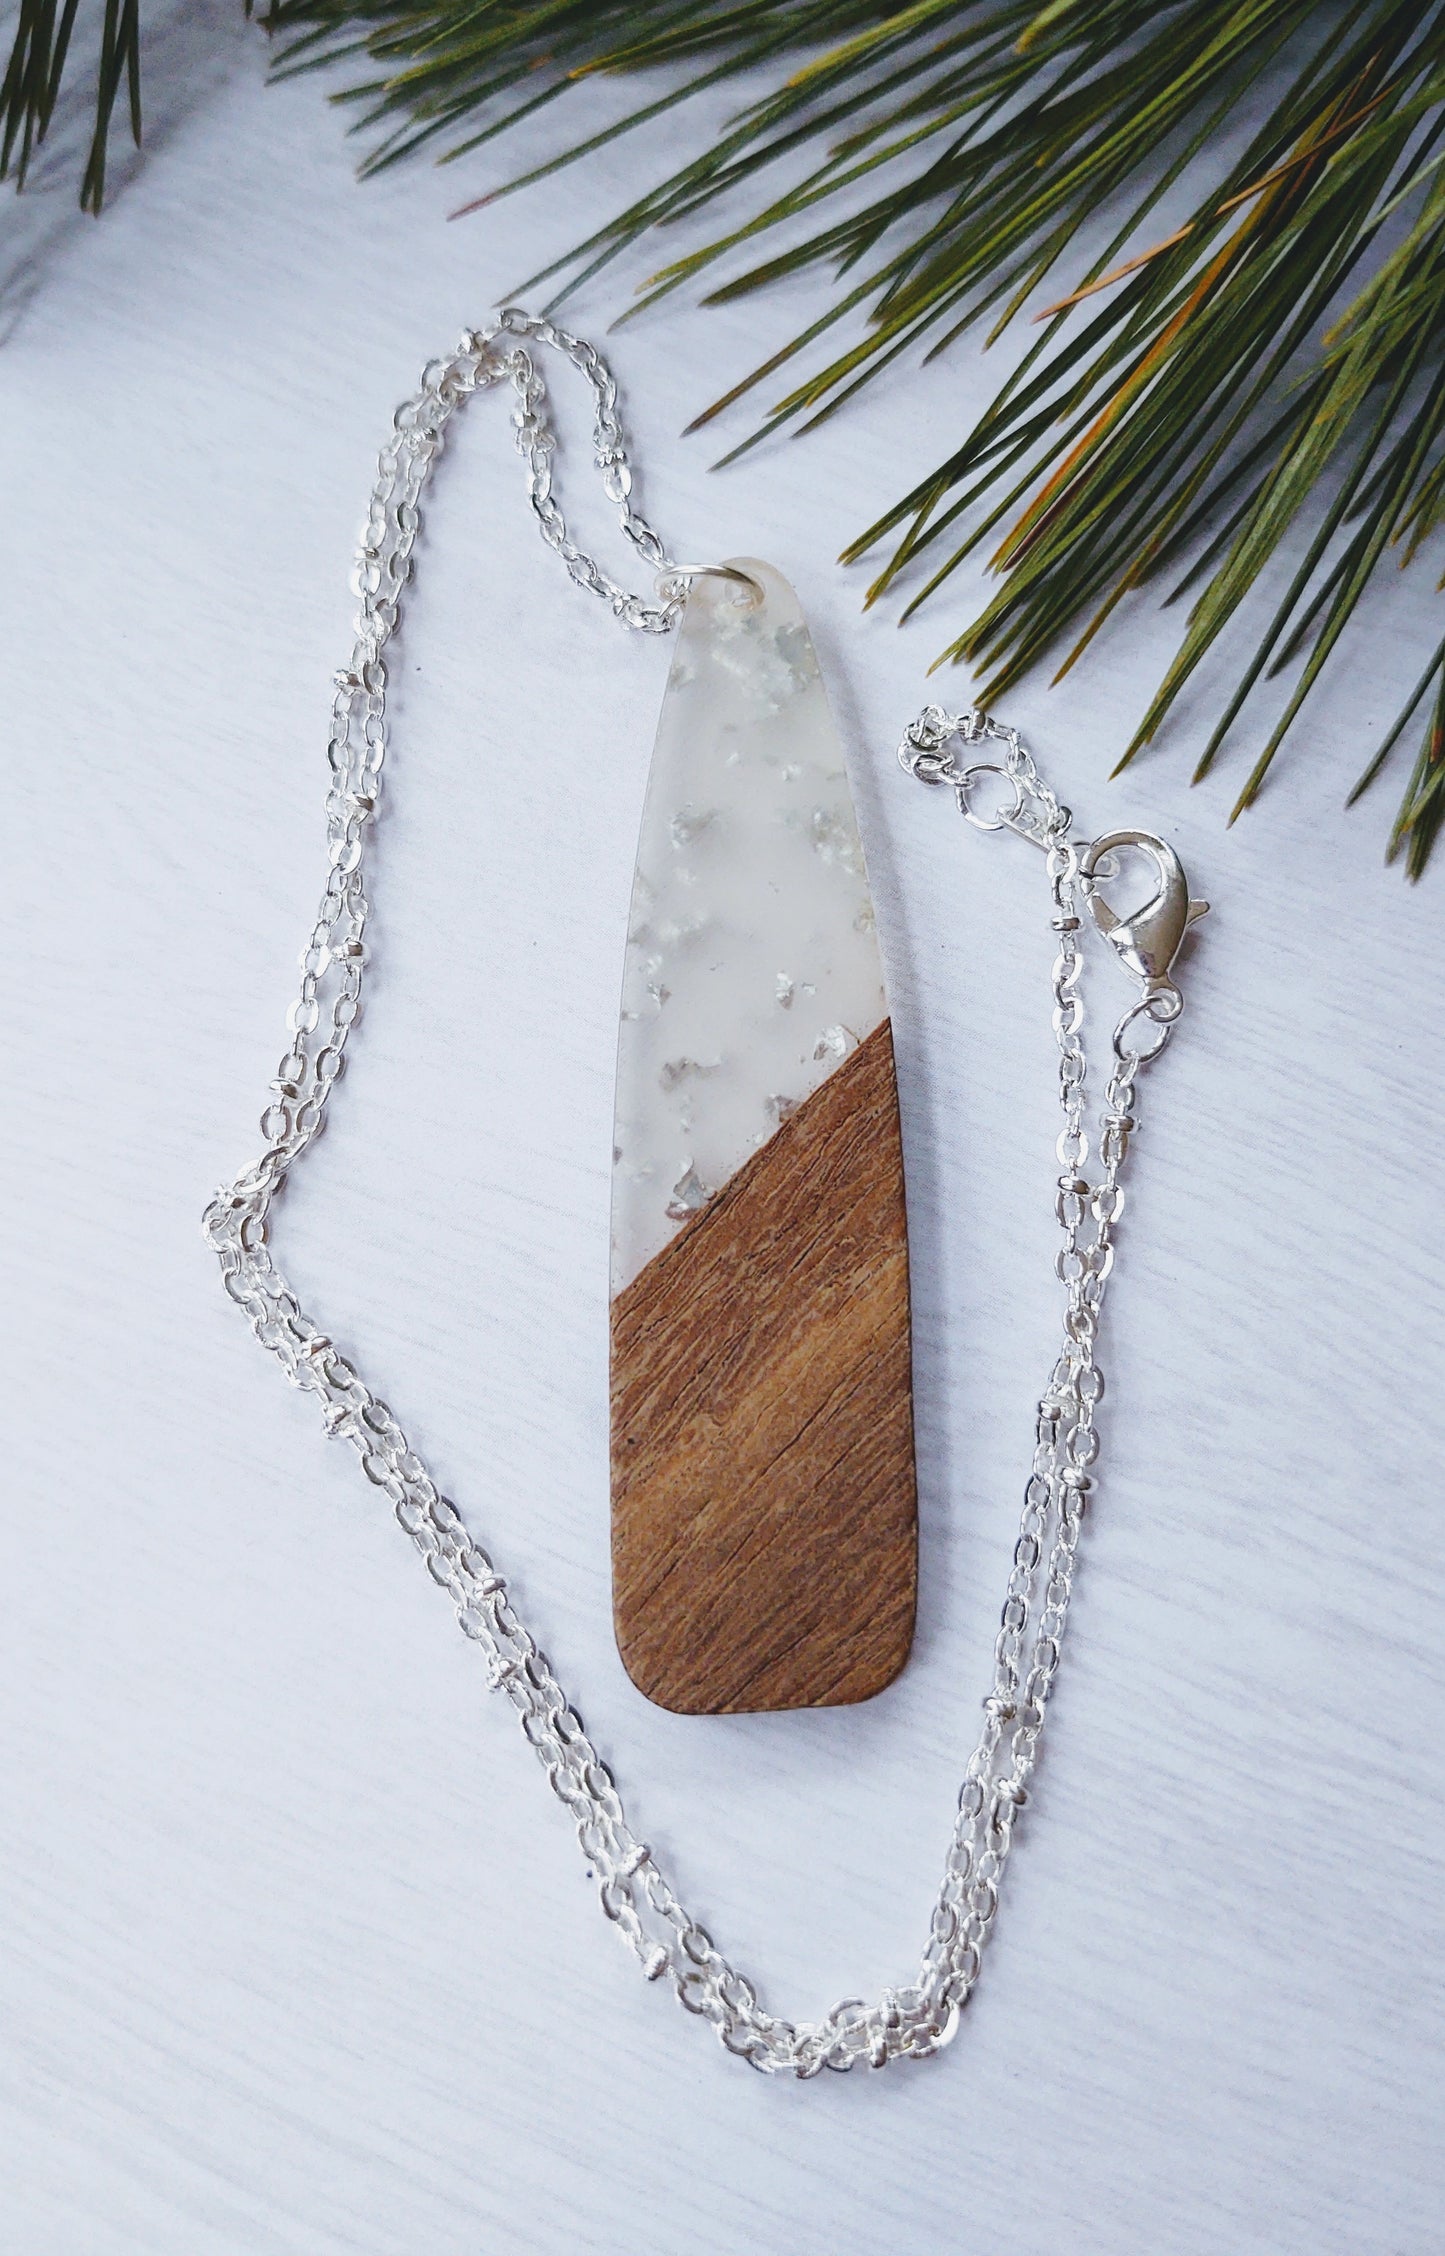 Silver and Wood necklace